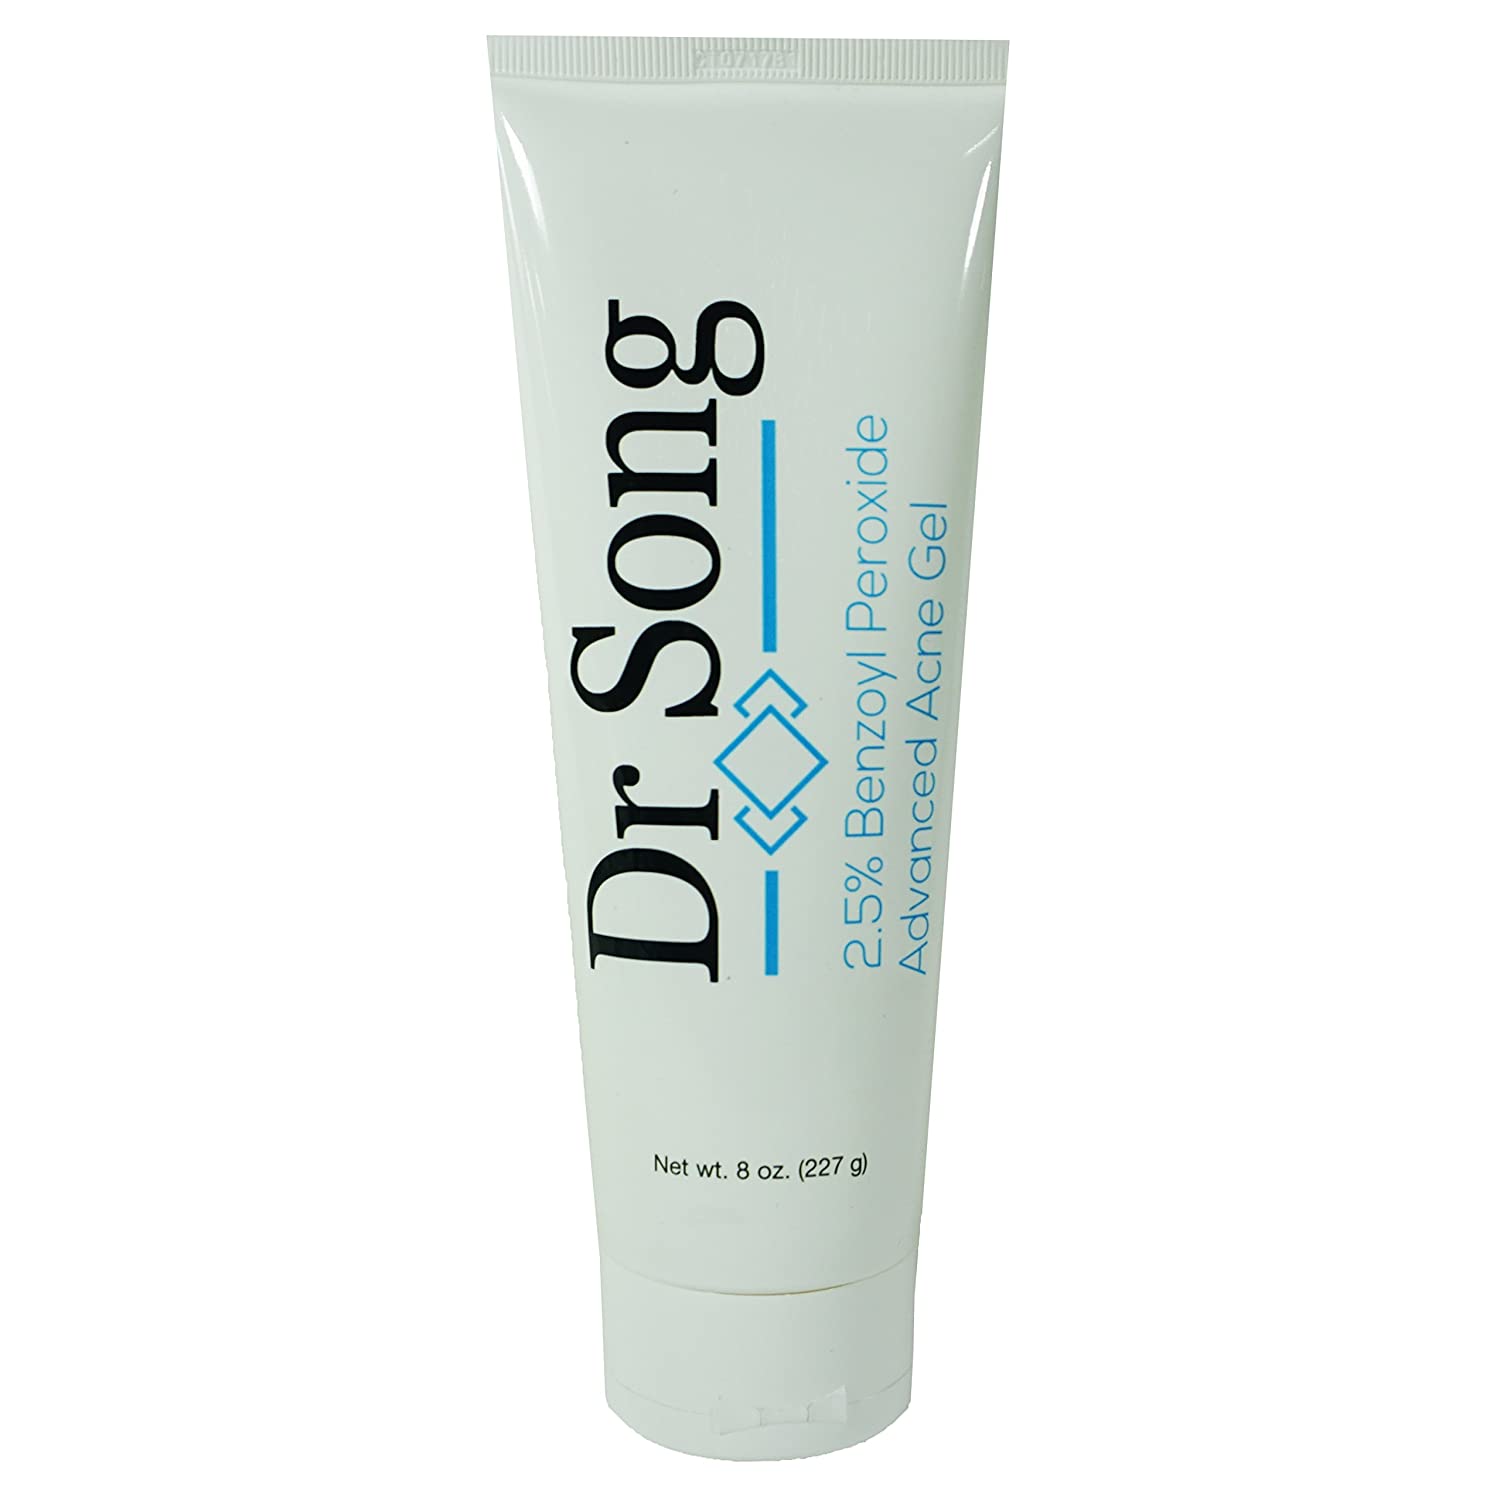 Dr. Song Acne Gel Treatment Lotion​ (2.5% Benzoyl Peroxide)